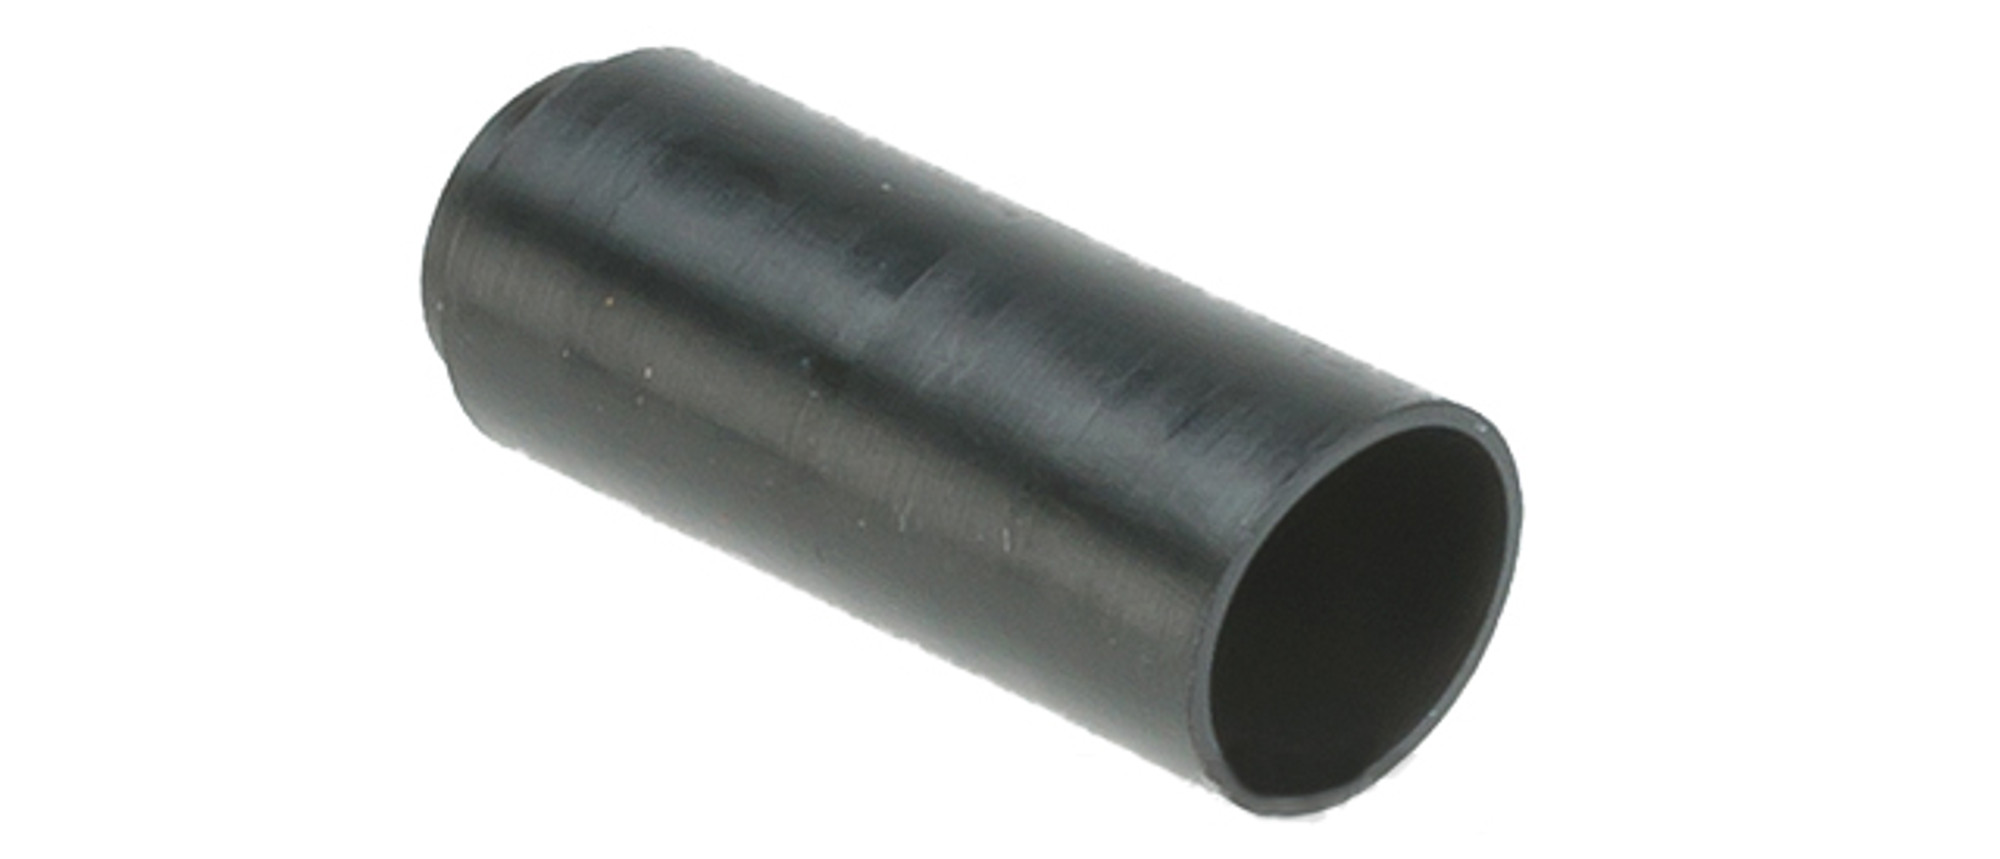 A-Plus Airsoft Performance 60 Degree Hopup Rubber Bucking for GHK Gas Blowback Series Rifle